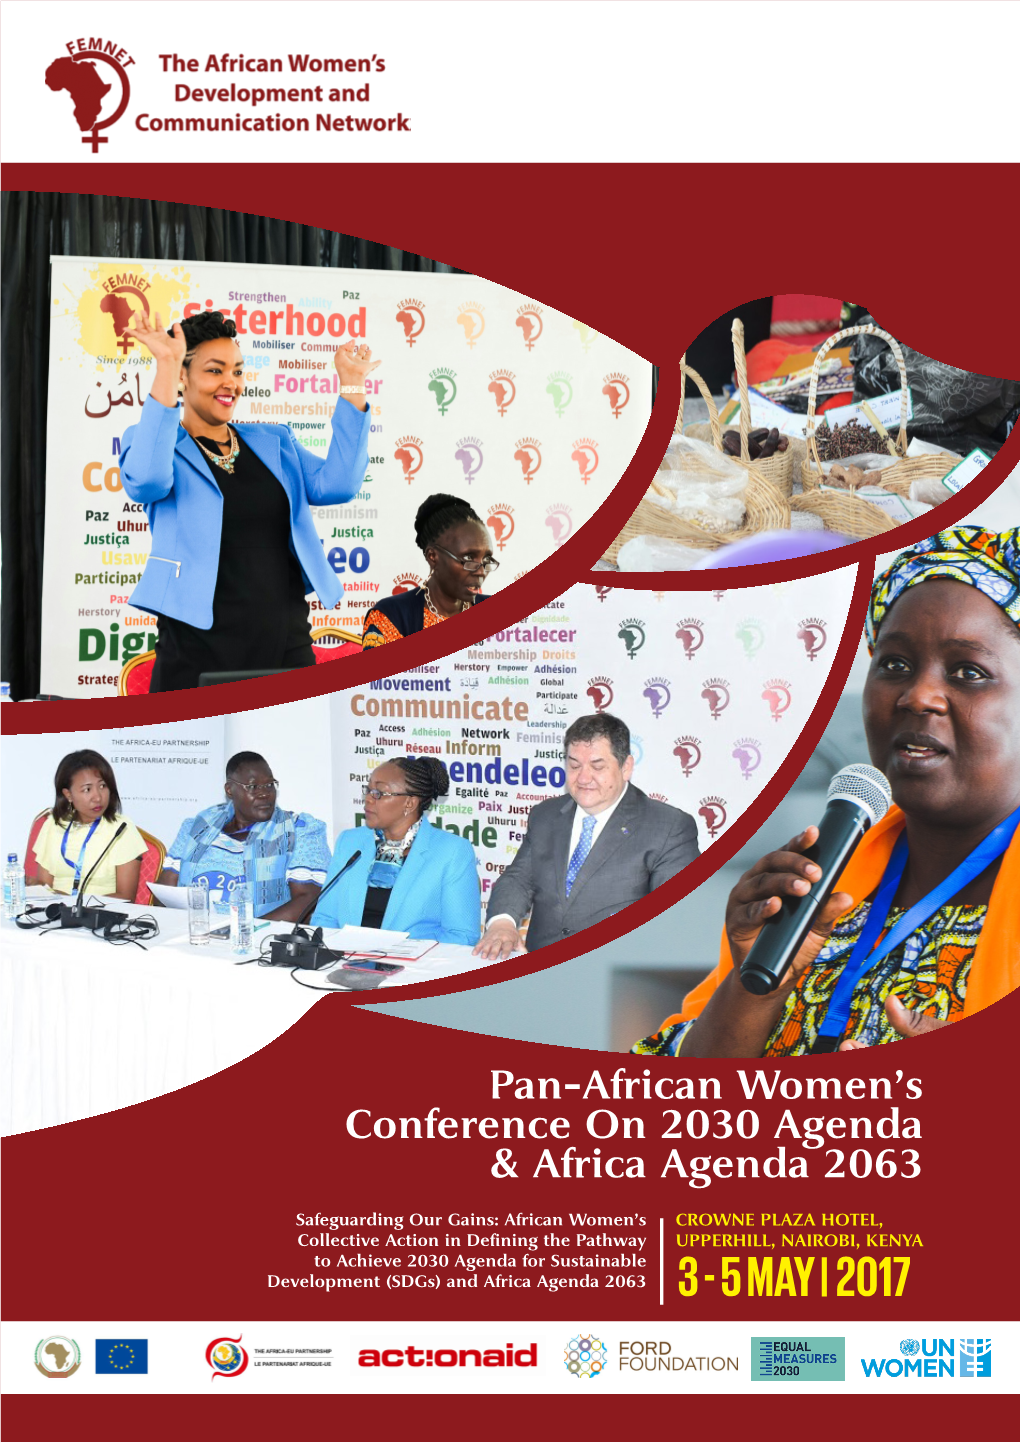 Pan-African Women's Conference on 2030 Agenda & Africa